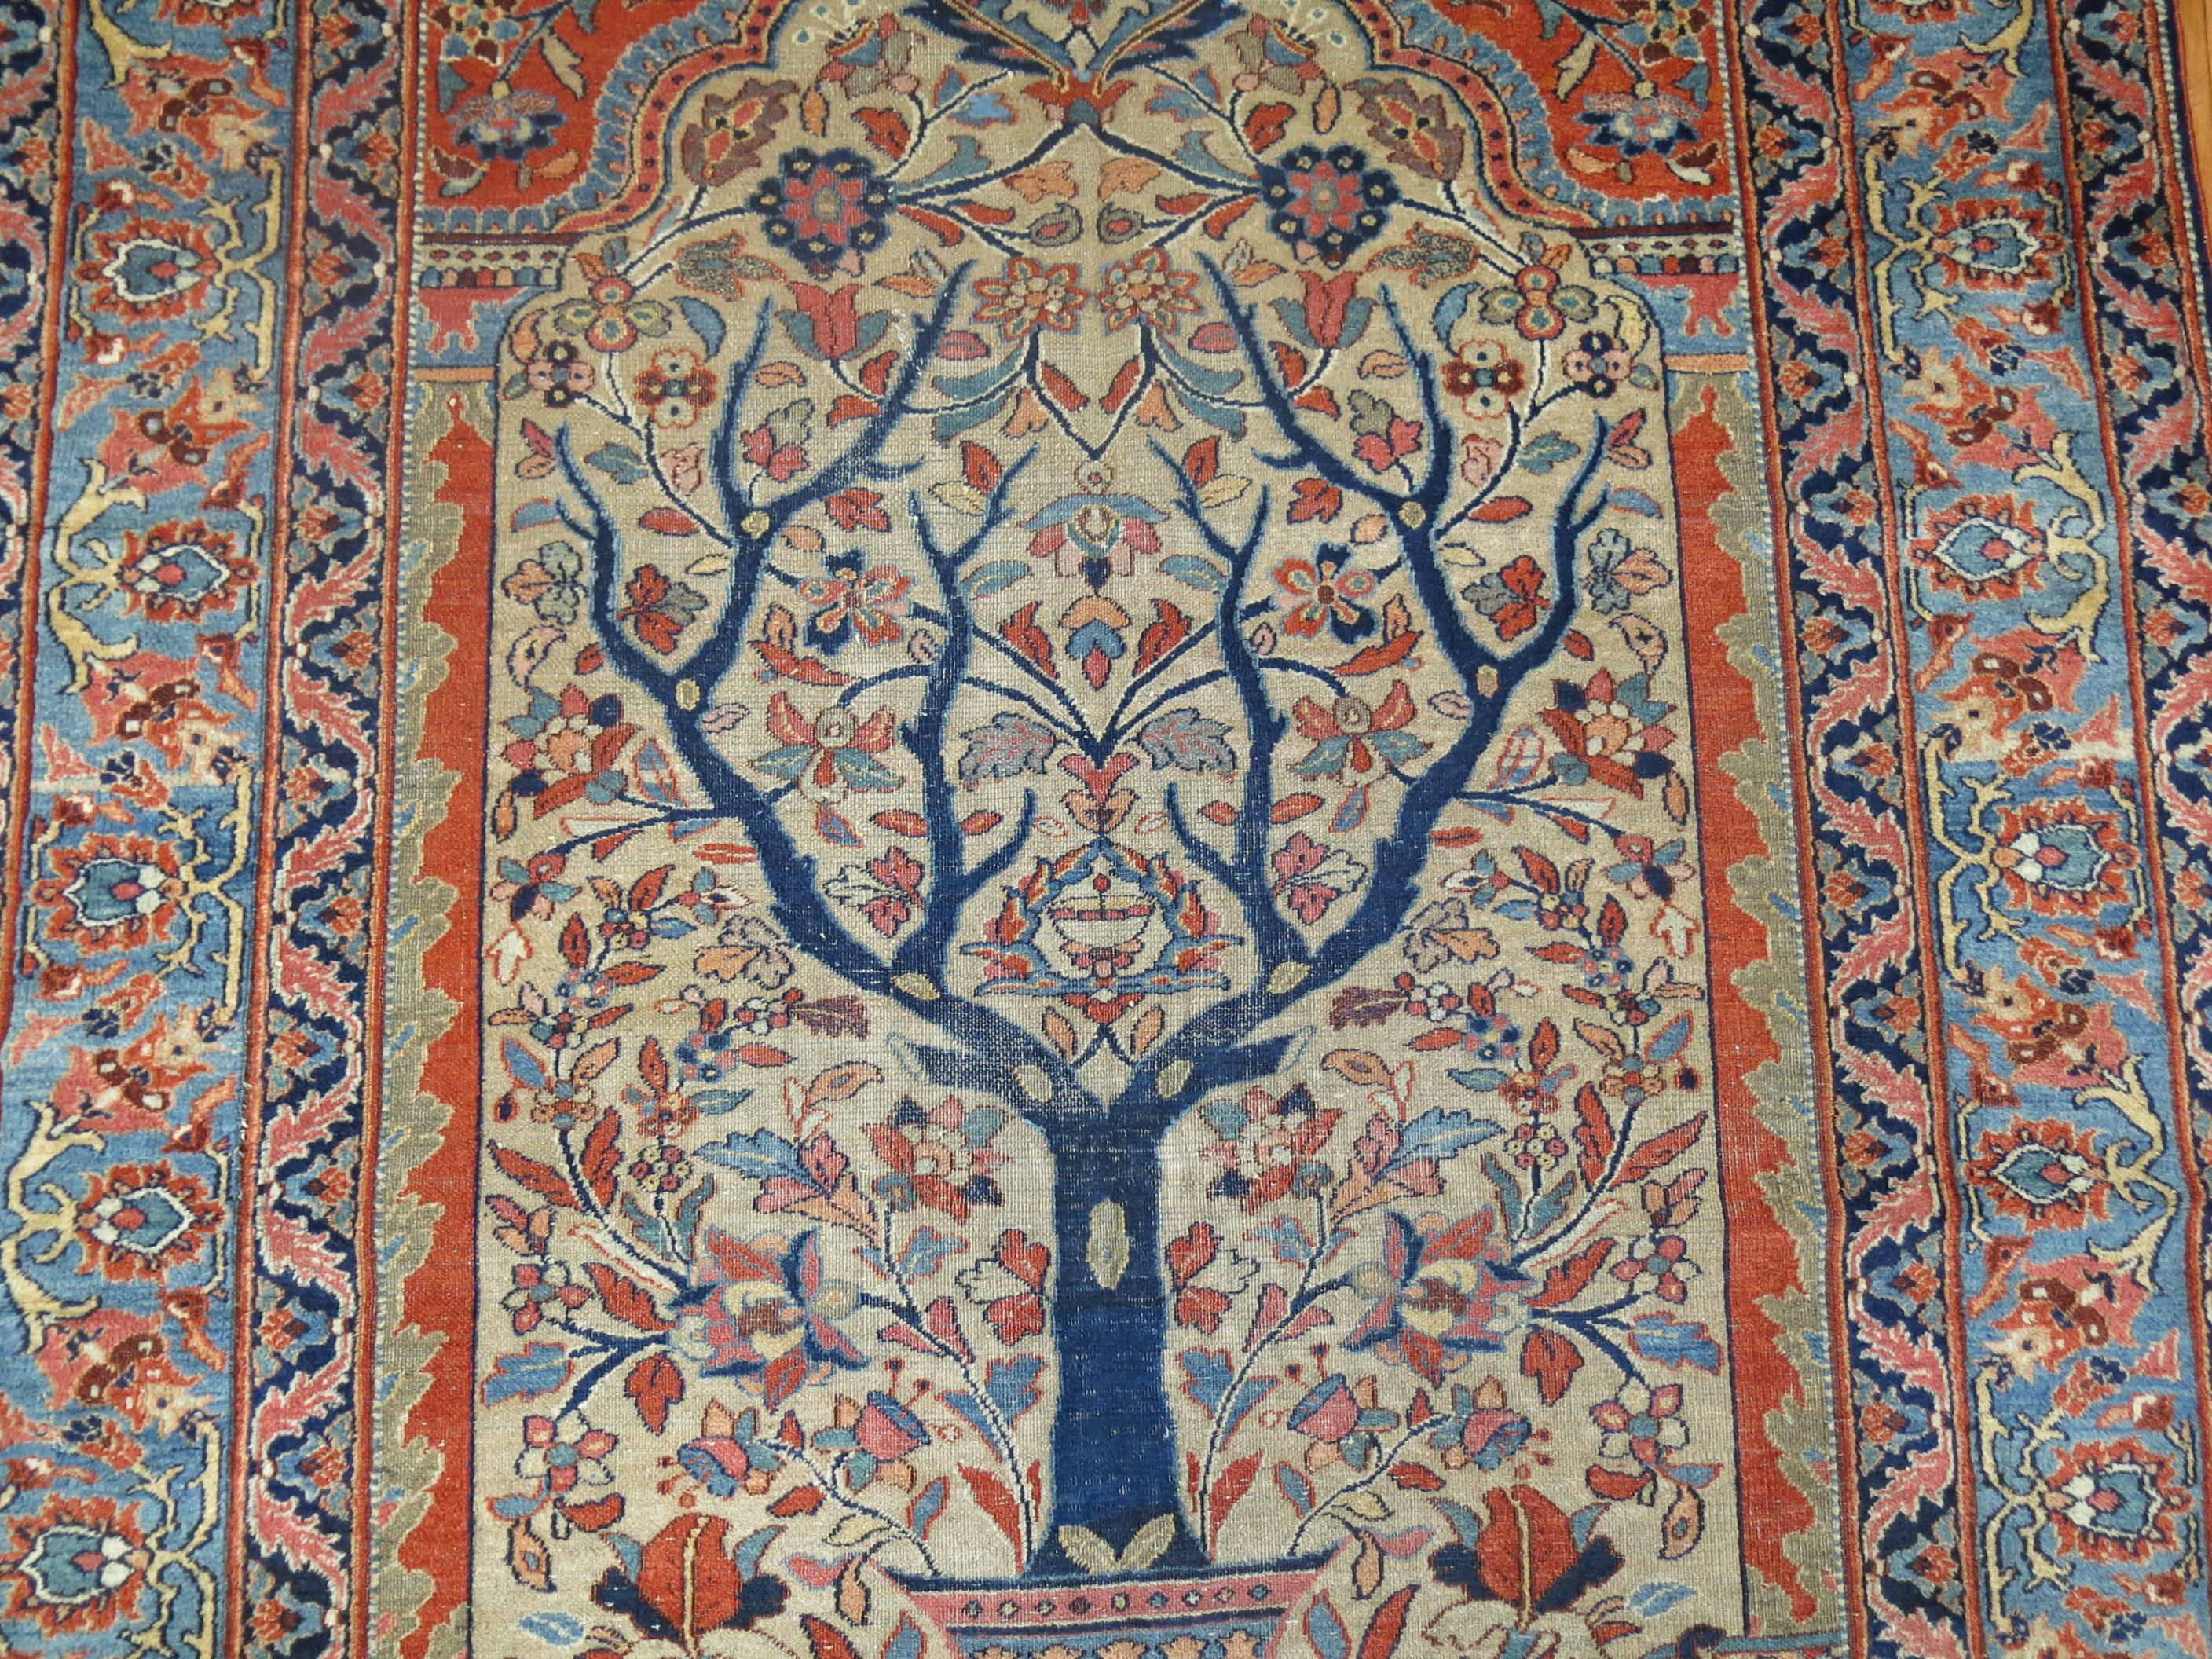 Zabihi Collection Persian Pictorial Doroksh Prayer Rug In Good Condition For Sale In New York, NY